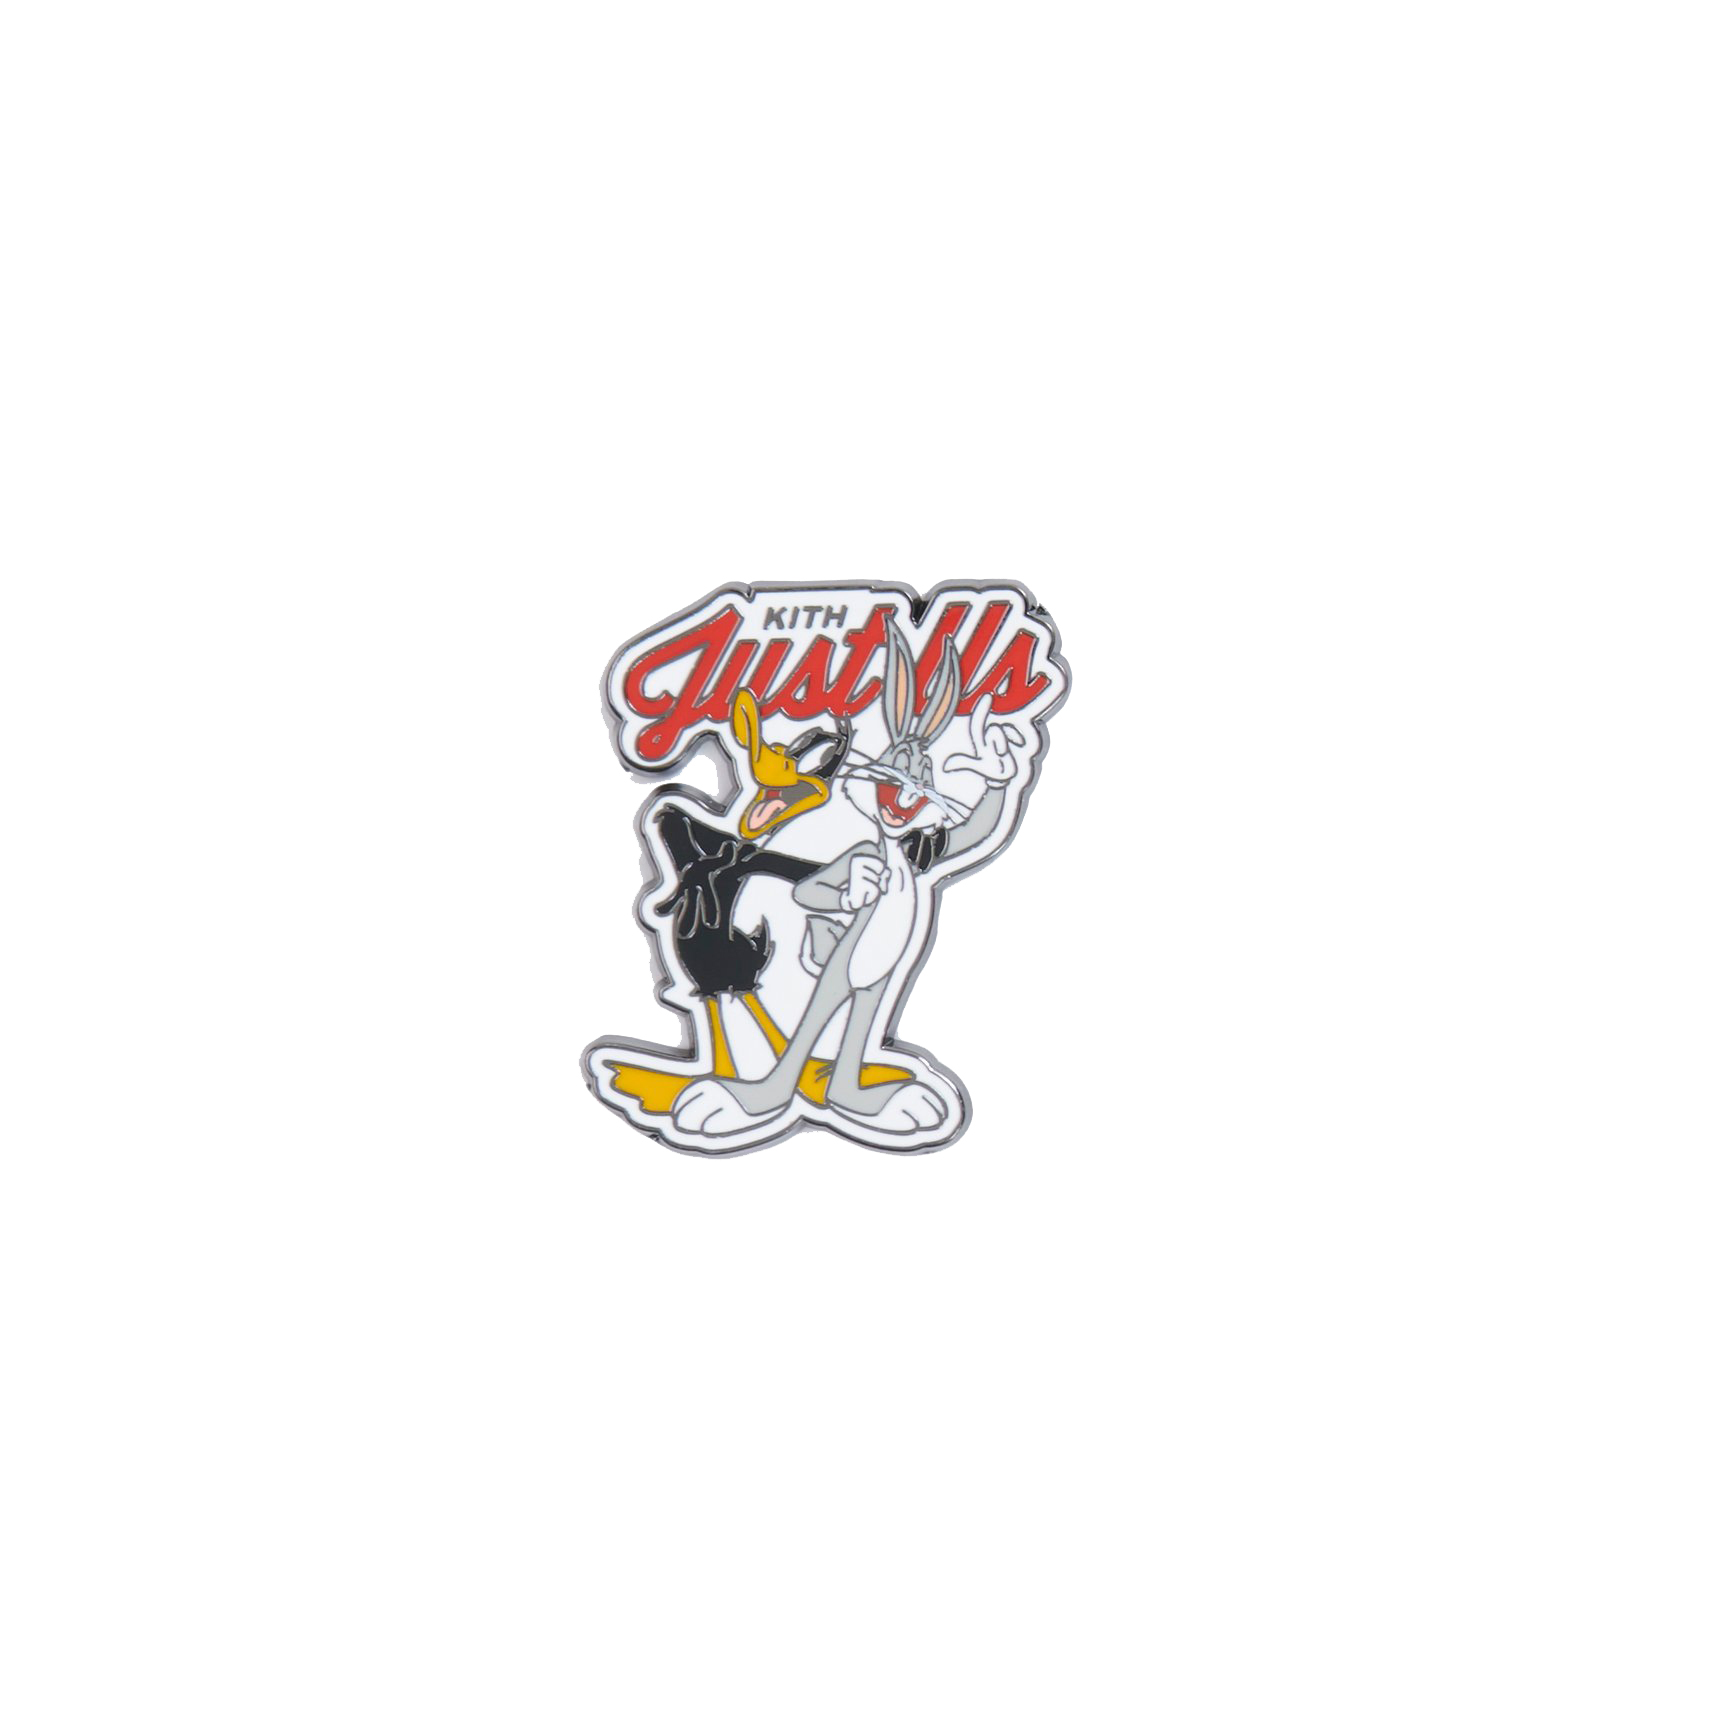 Kith x Looney Tunes Just Us Pin - US